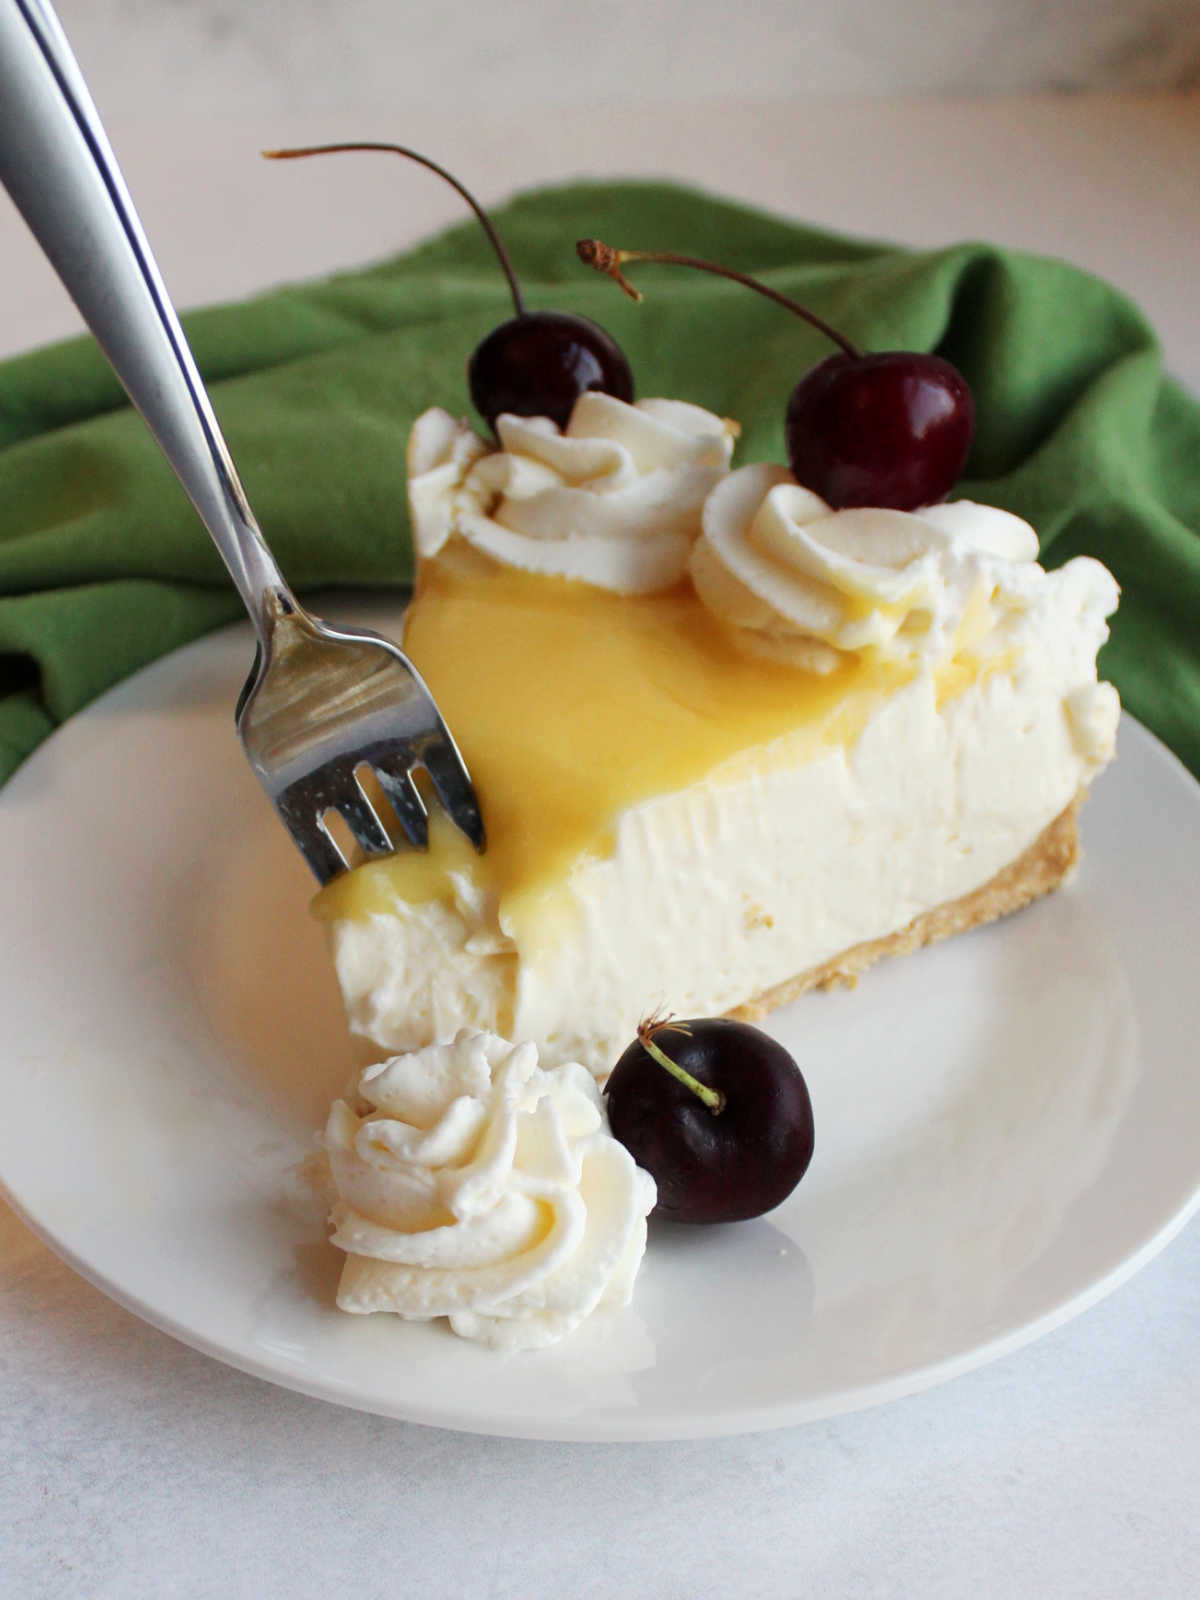 For getting bite of creamy no bake lemon cheesecake topped with lemon curd and fresh cherries.